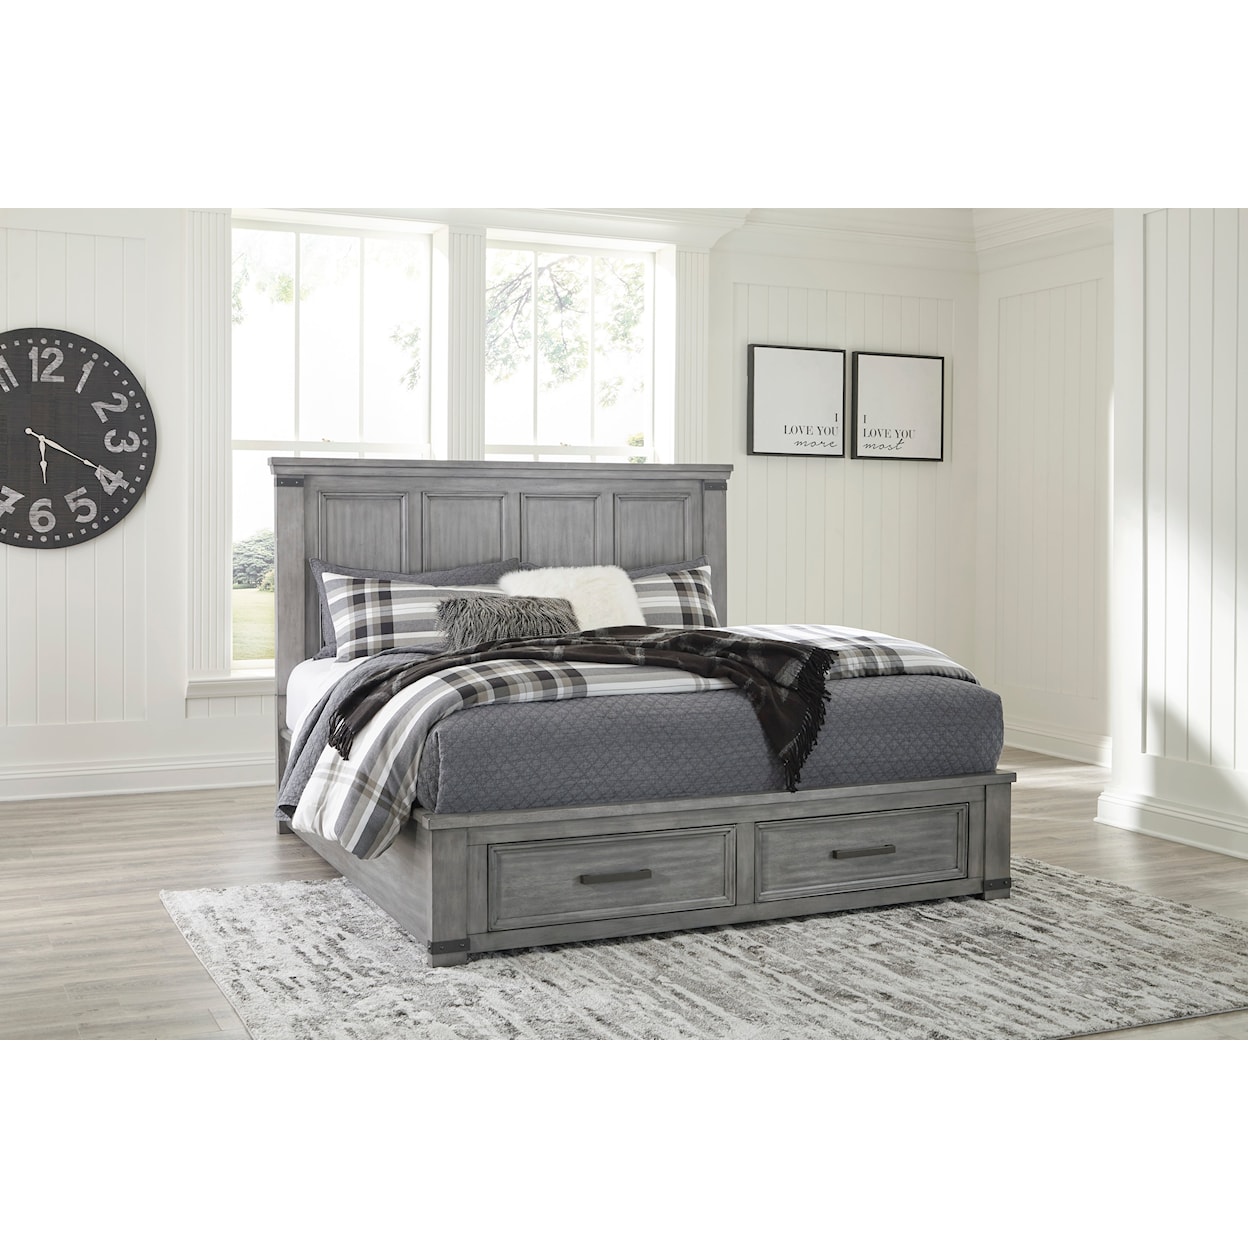 Ashley Russelyn Russelyn Queen Storage Bed